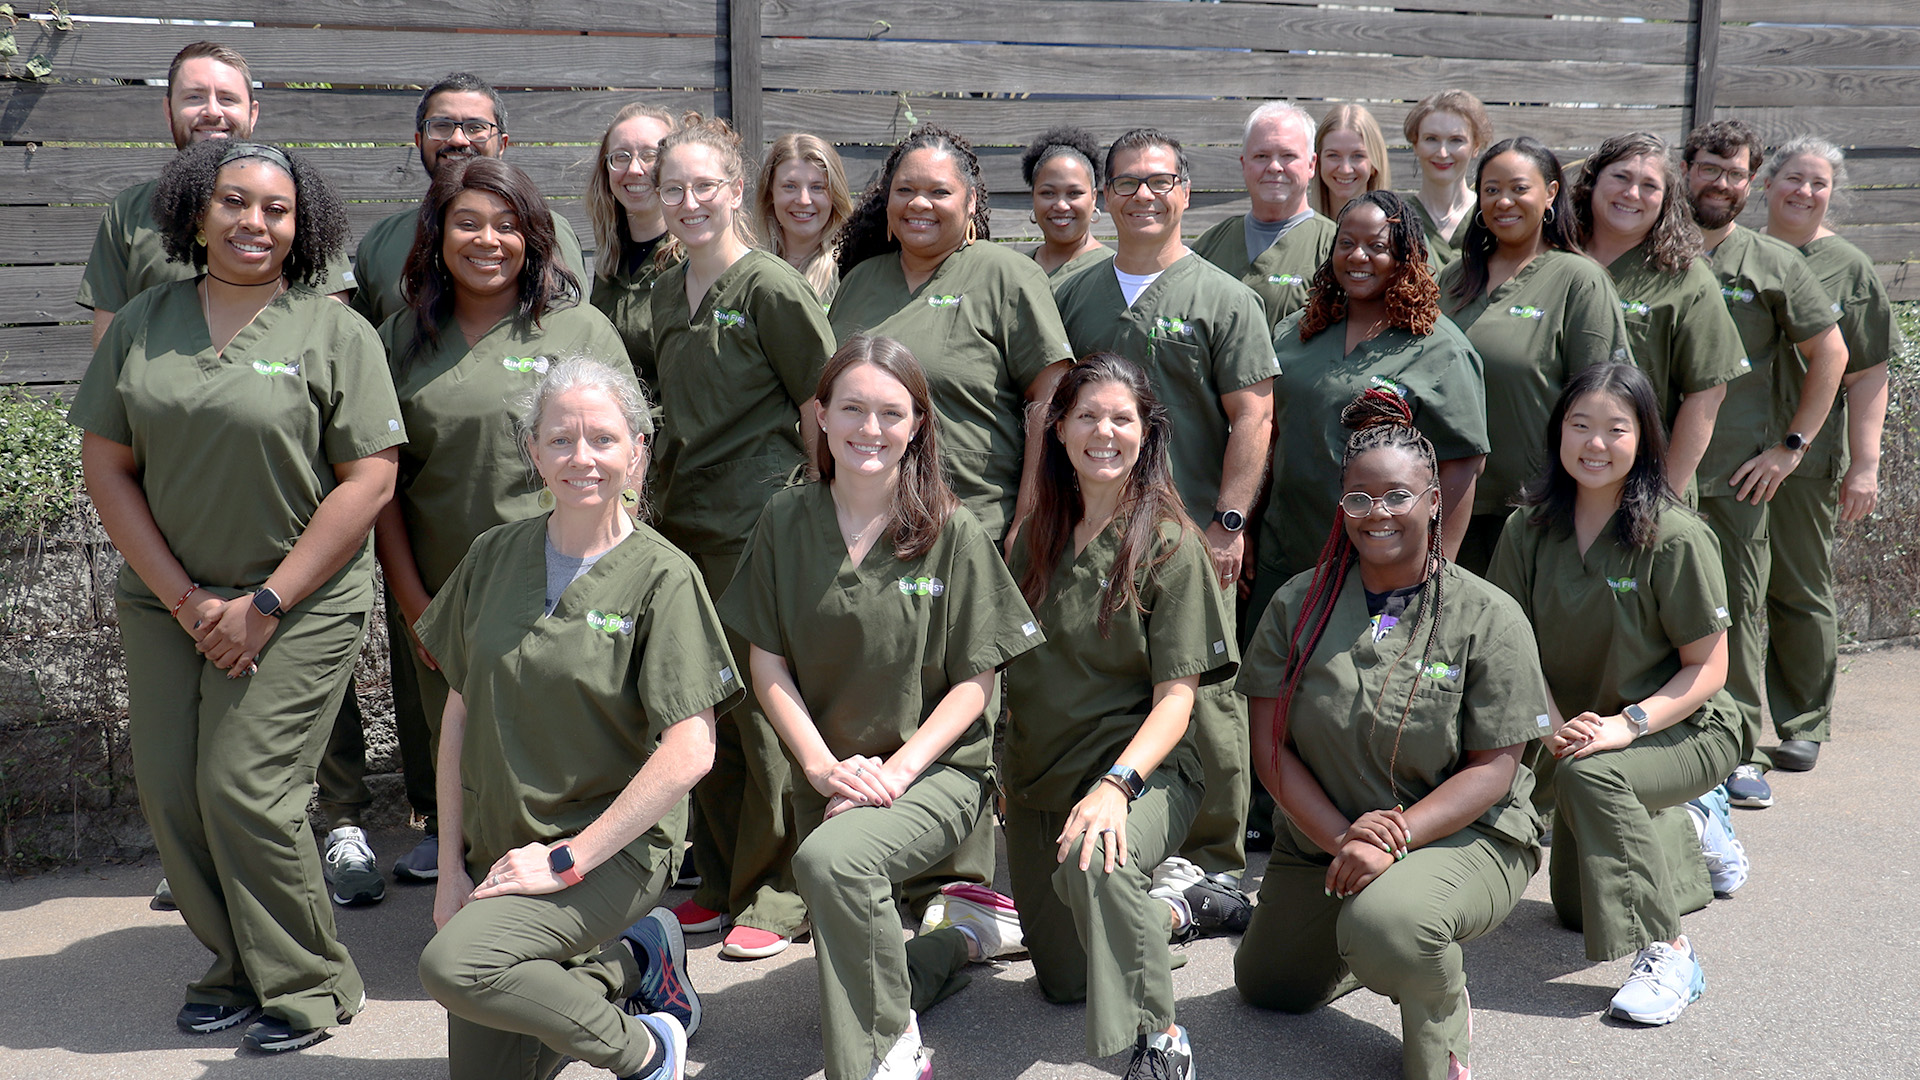 A group of men and women smiling in green clinical scrubs